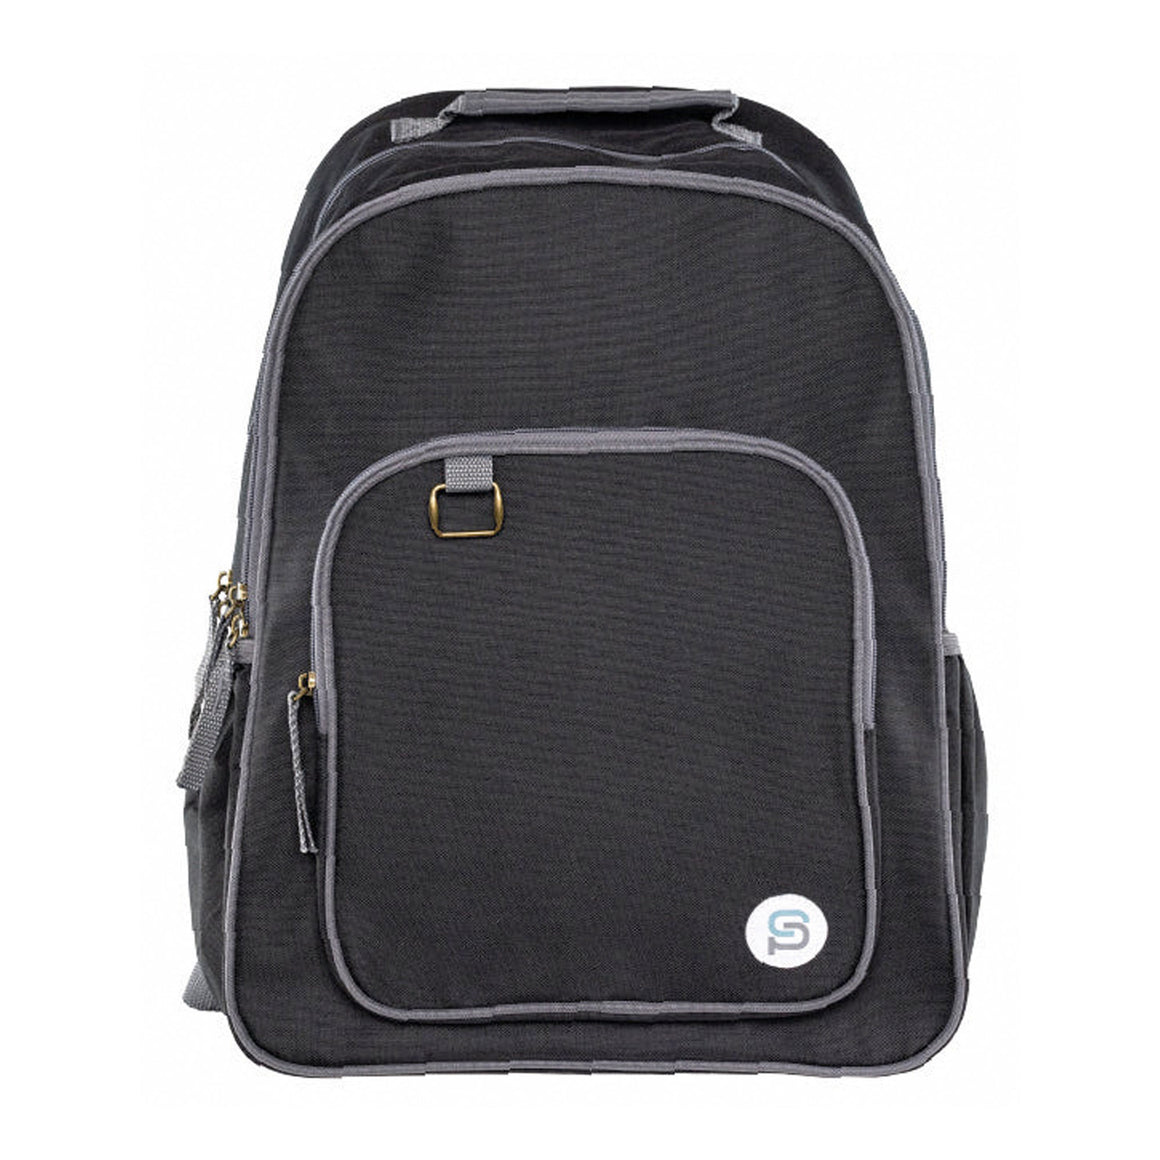 Sydney Paige x BAZIC 18" RALEIGH Black Backpack